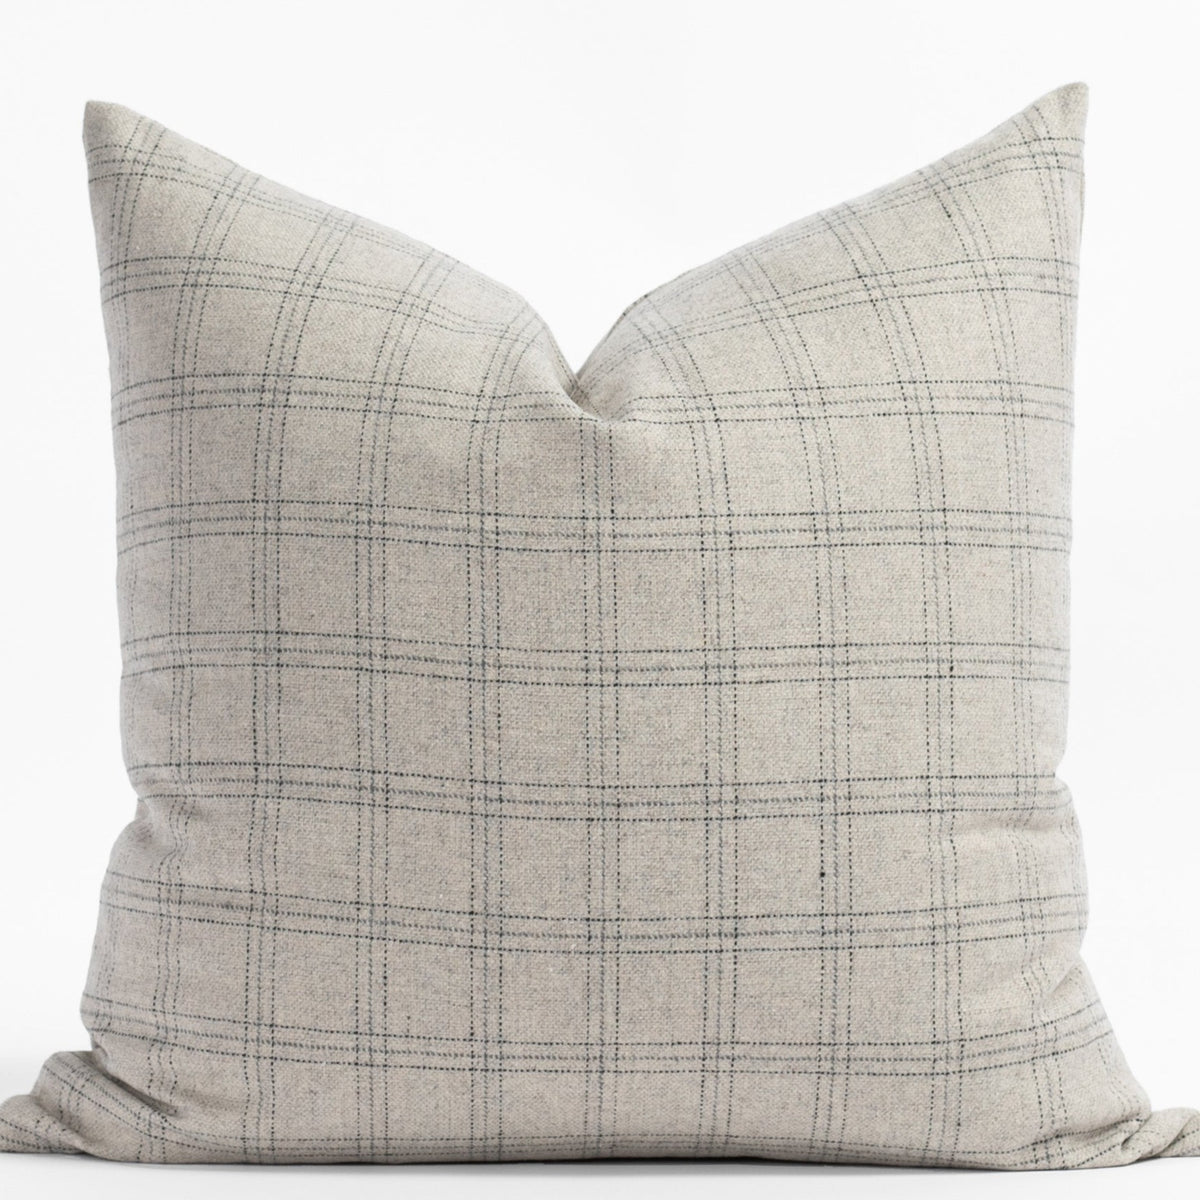 Nepal Plaid Pillow Cover